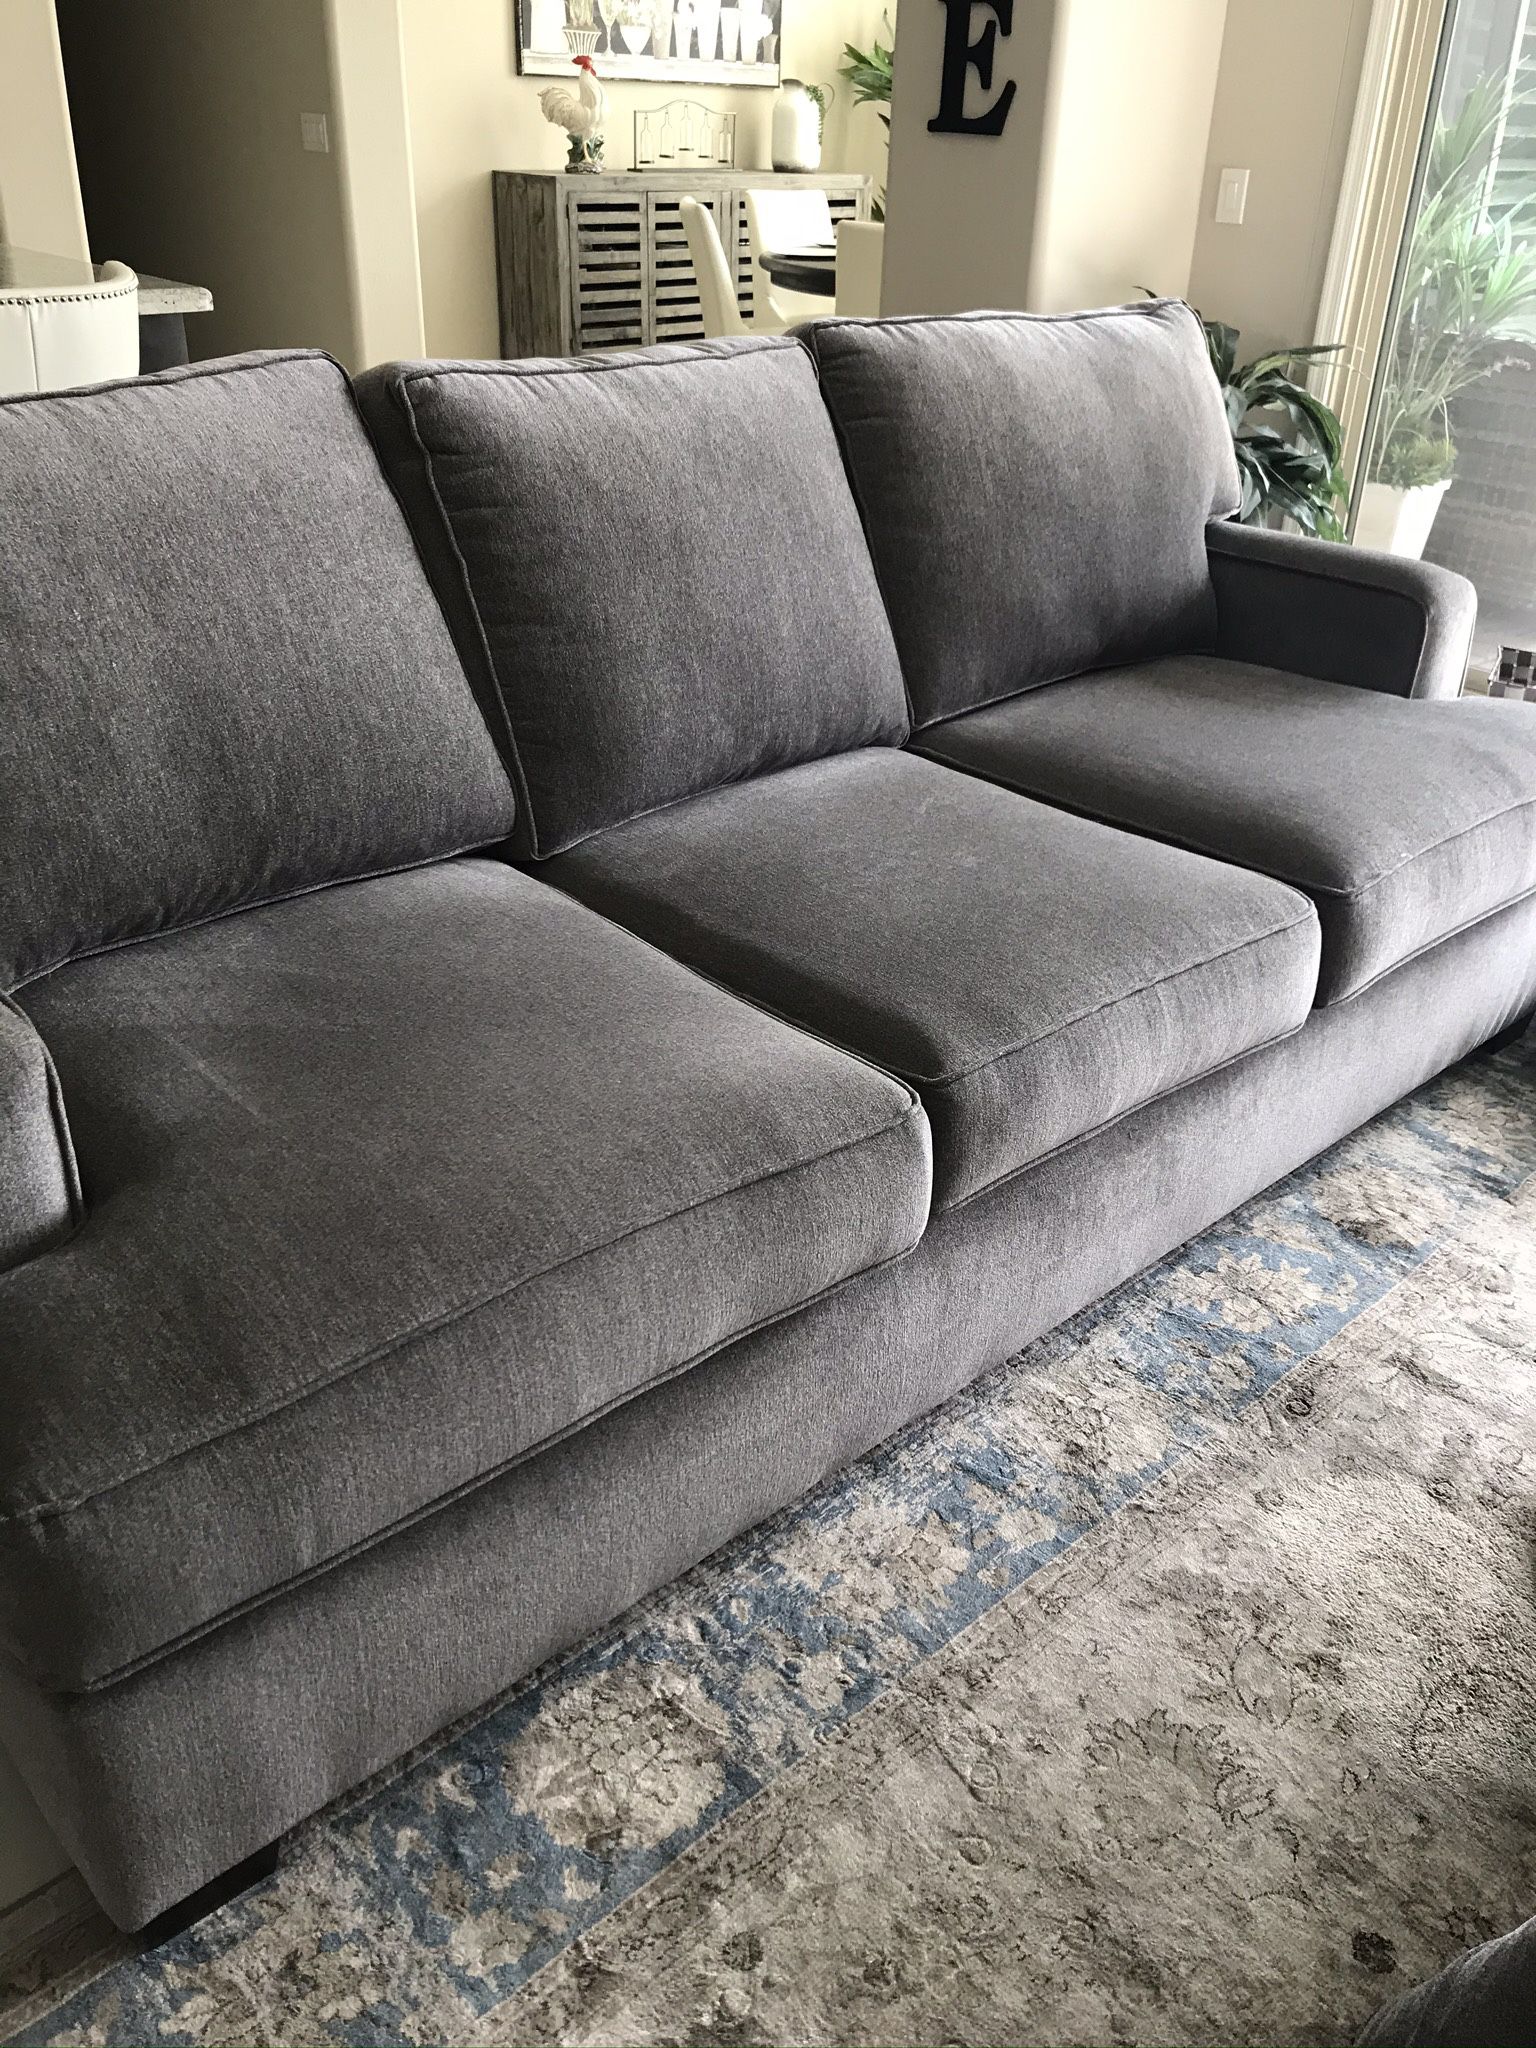 2 Matchiing Silver Gray Chenille  Sofas no Custom Made By Richardson /Phoenix $725 Ea Perfect Condition Clean